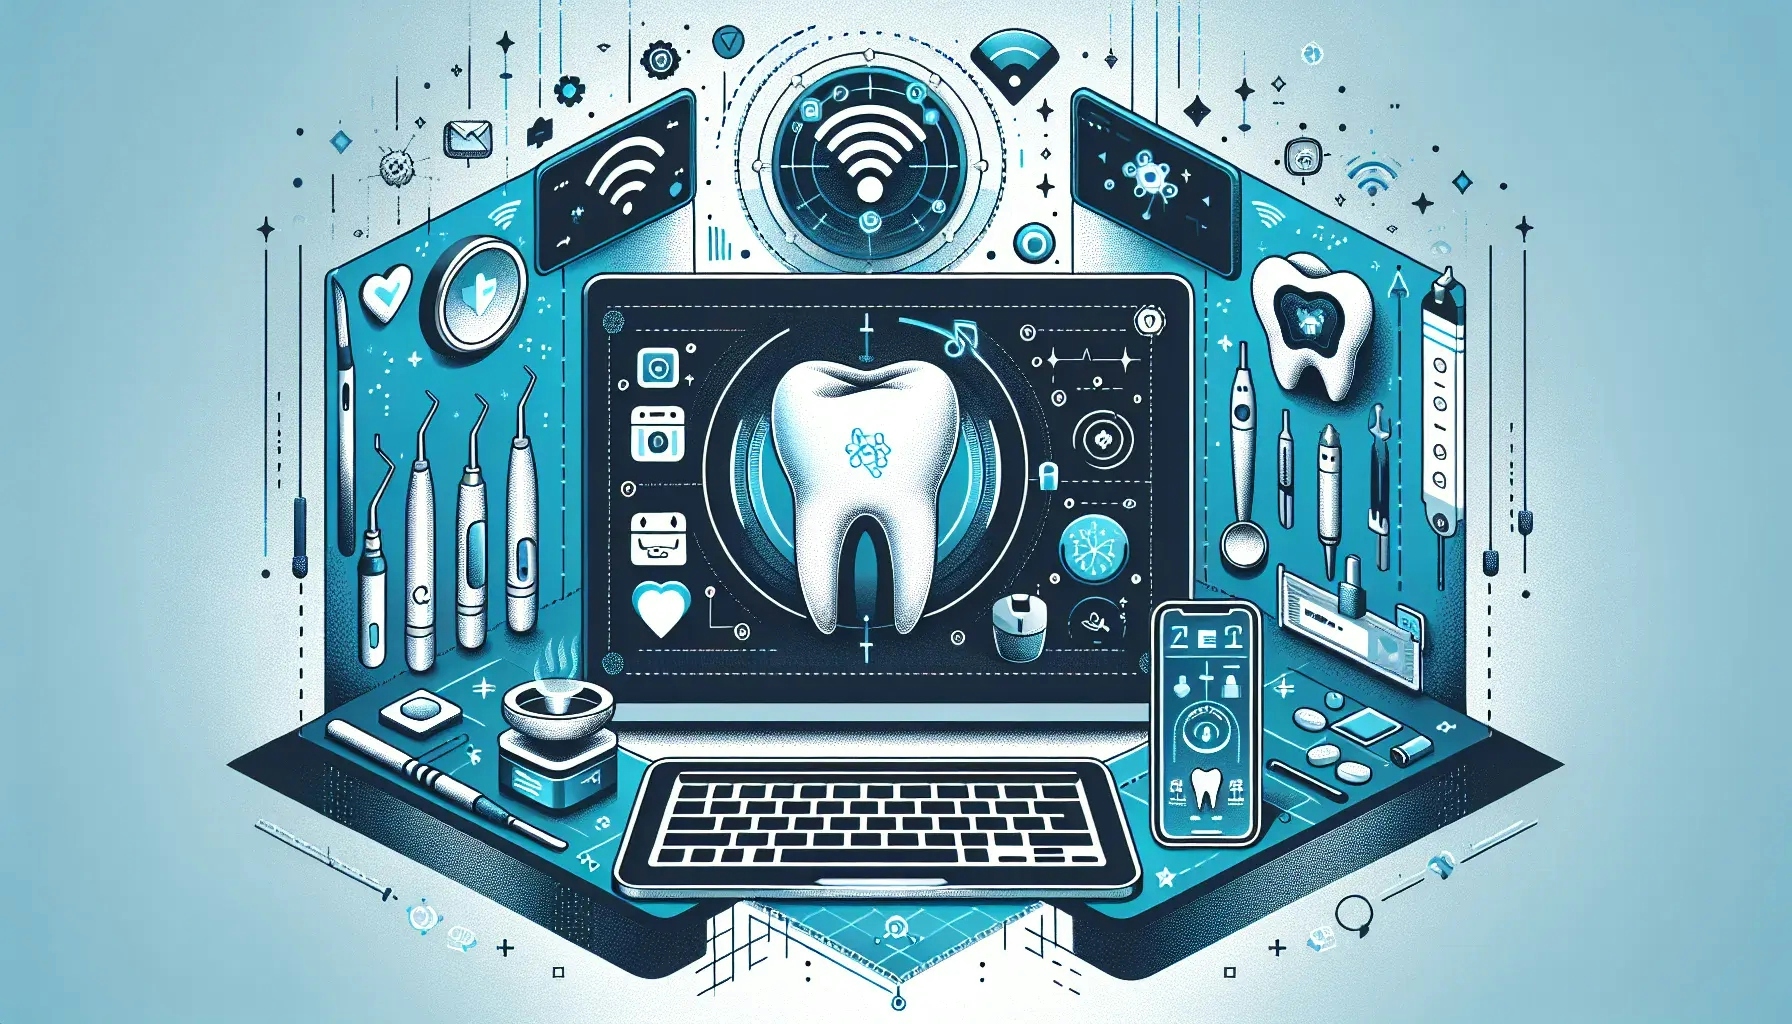 teledentistry and its future potential